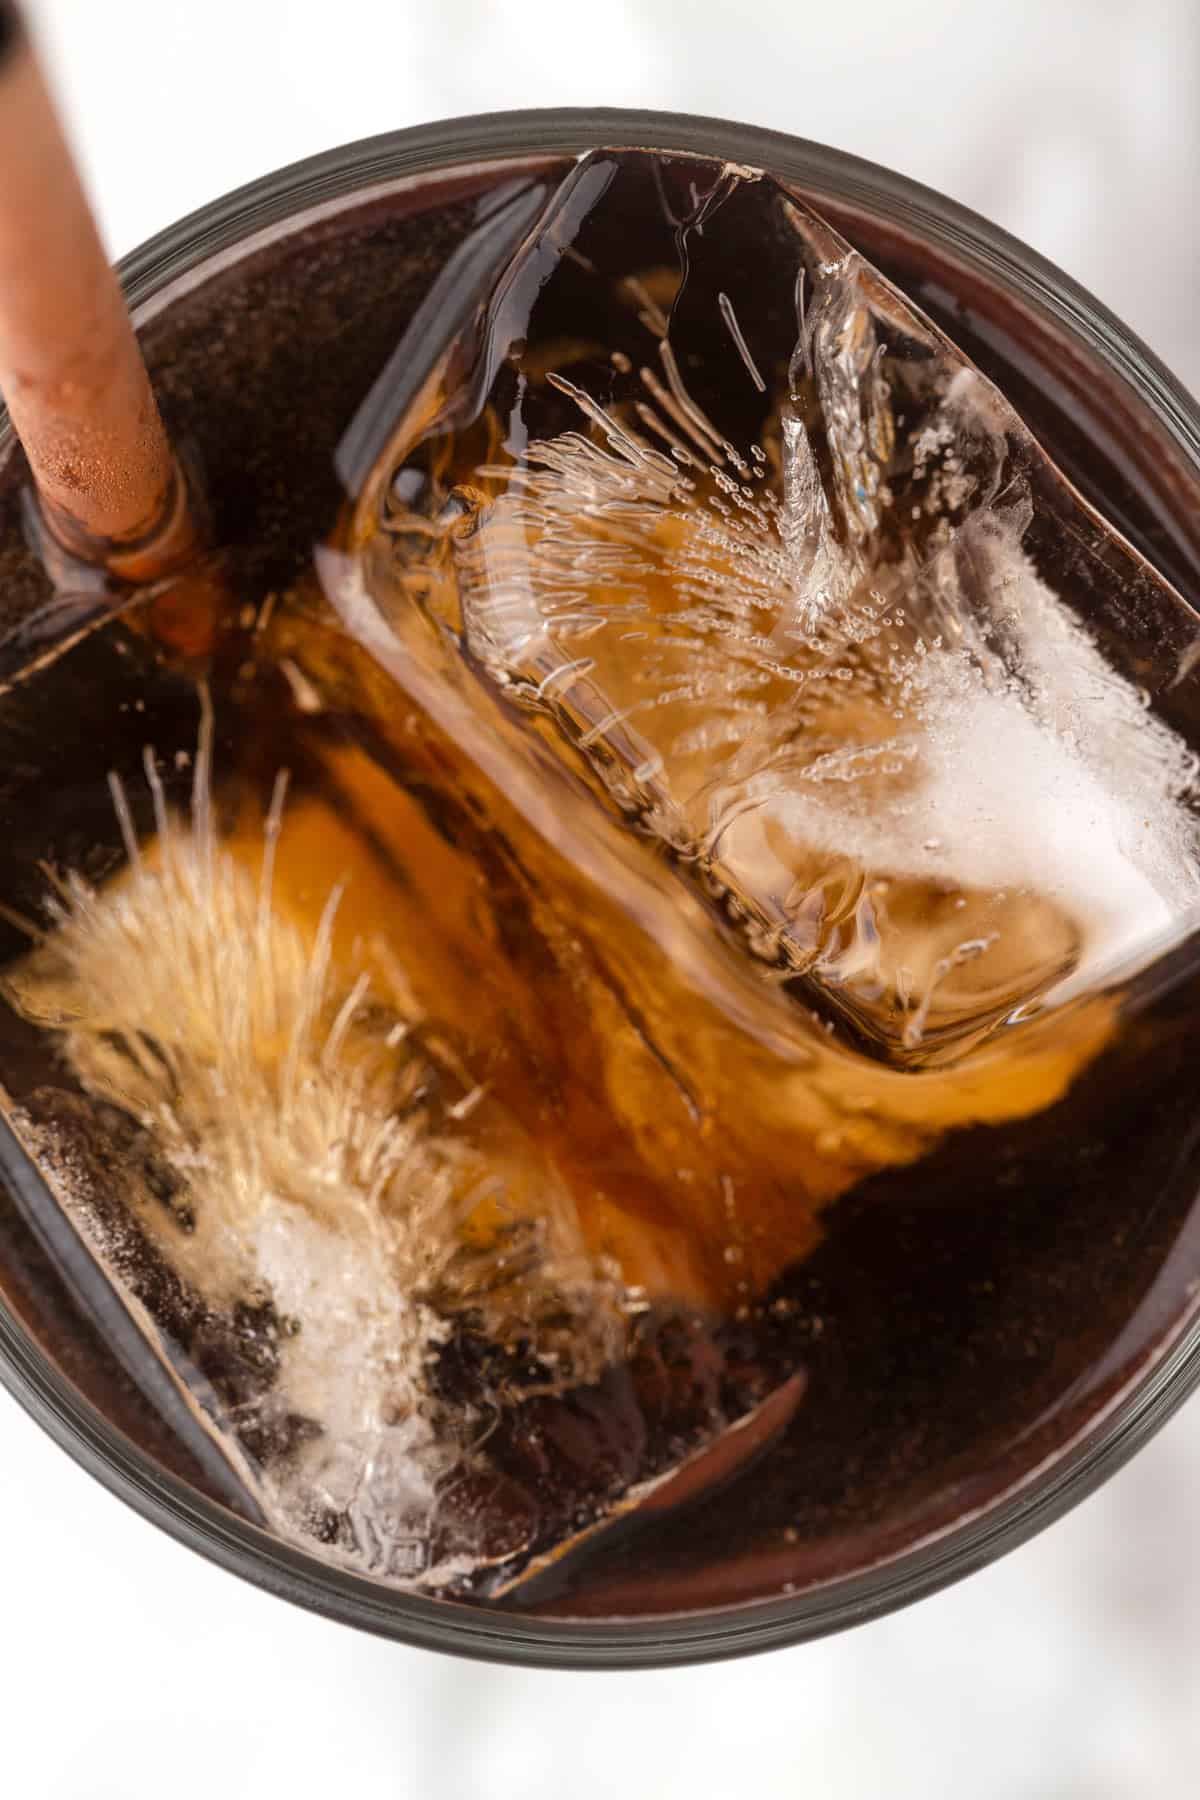 Overhead view of a glass of coke with ice and a straw.